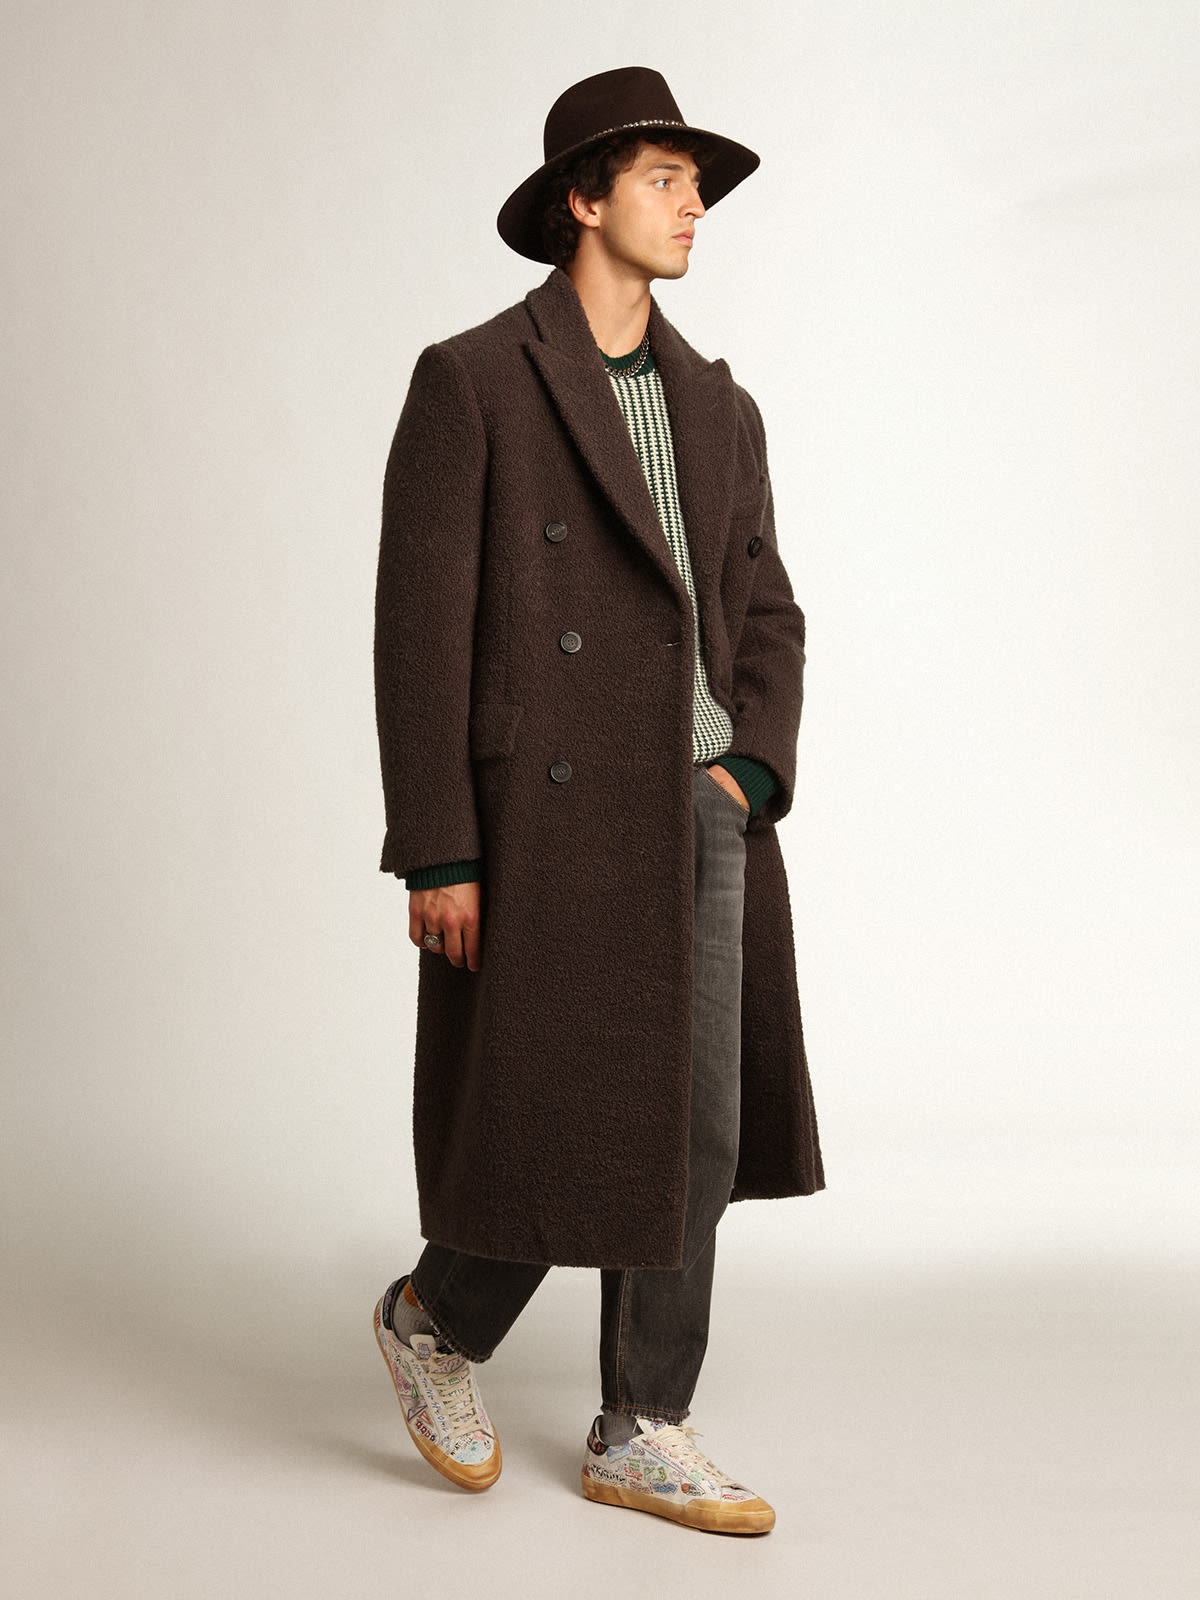 Men's double-breasted coat in licorice-colored bouclé wool - 3